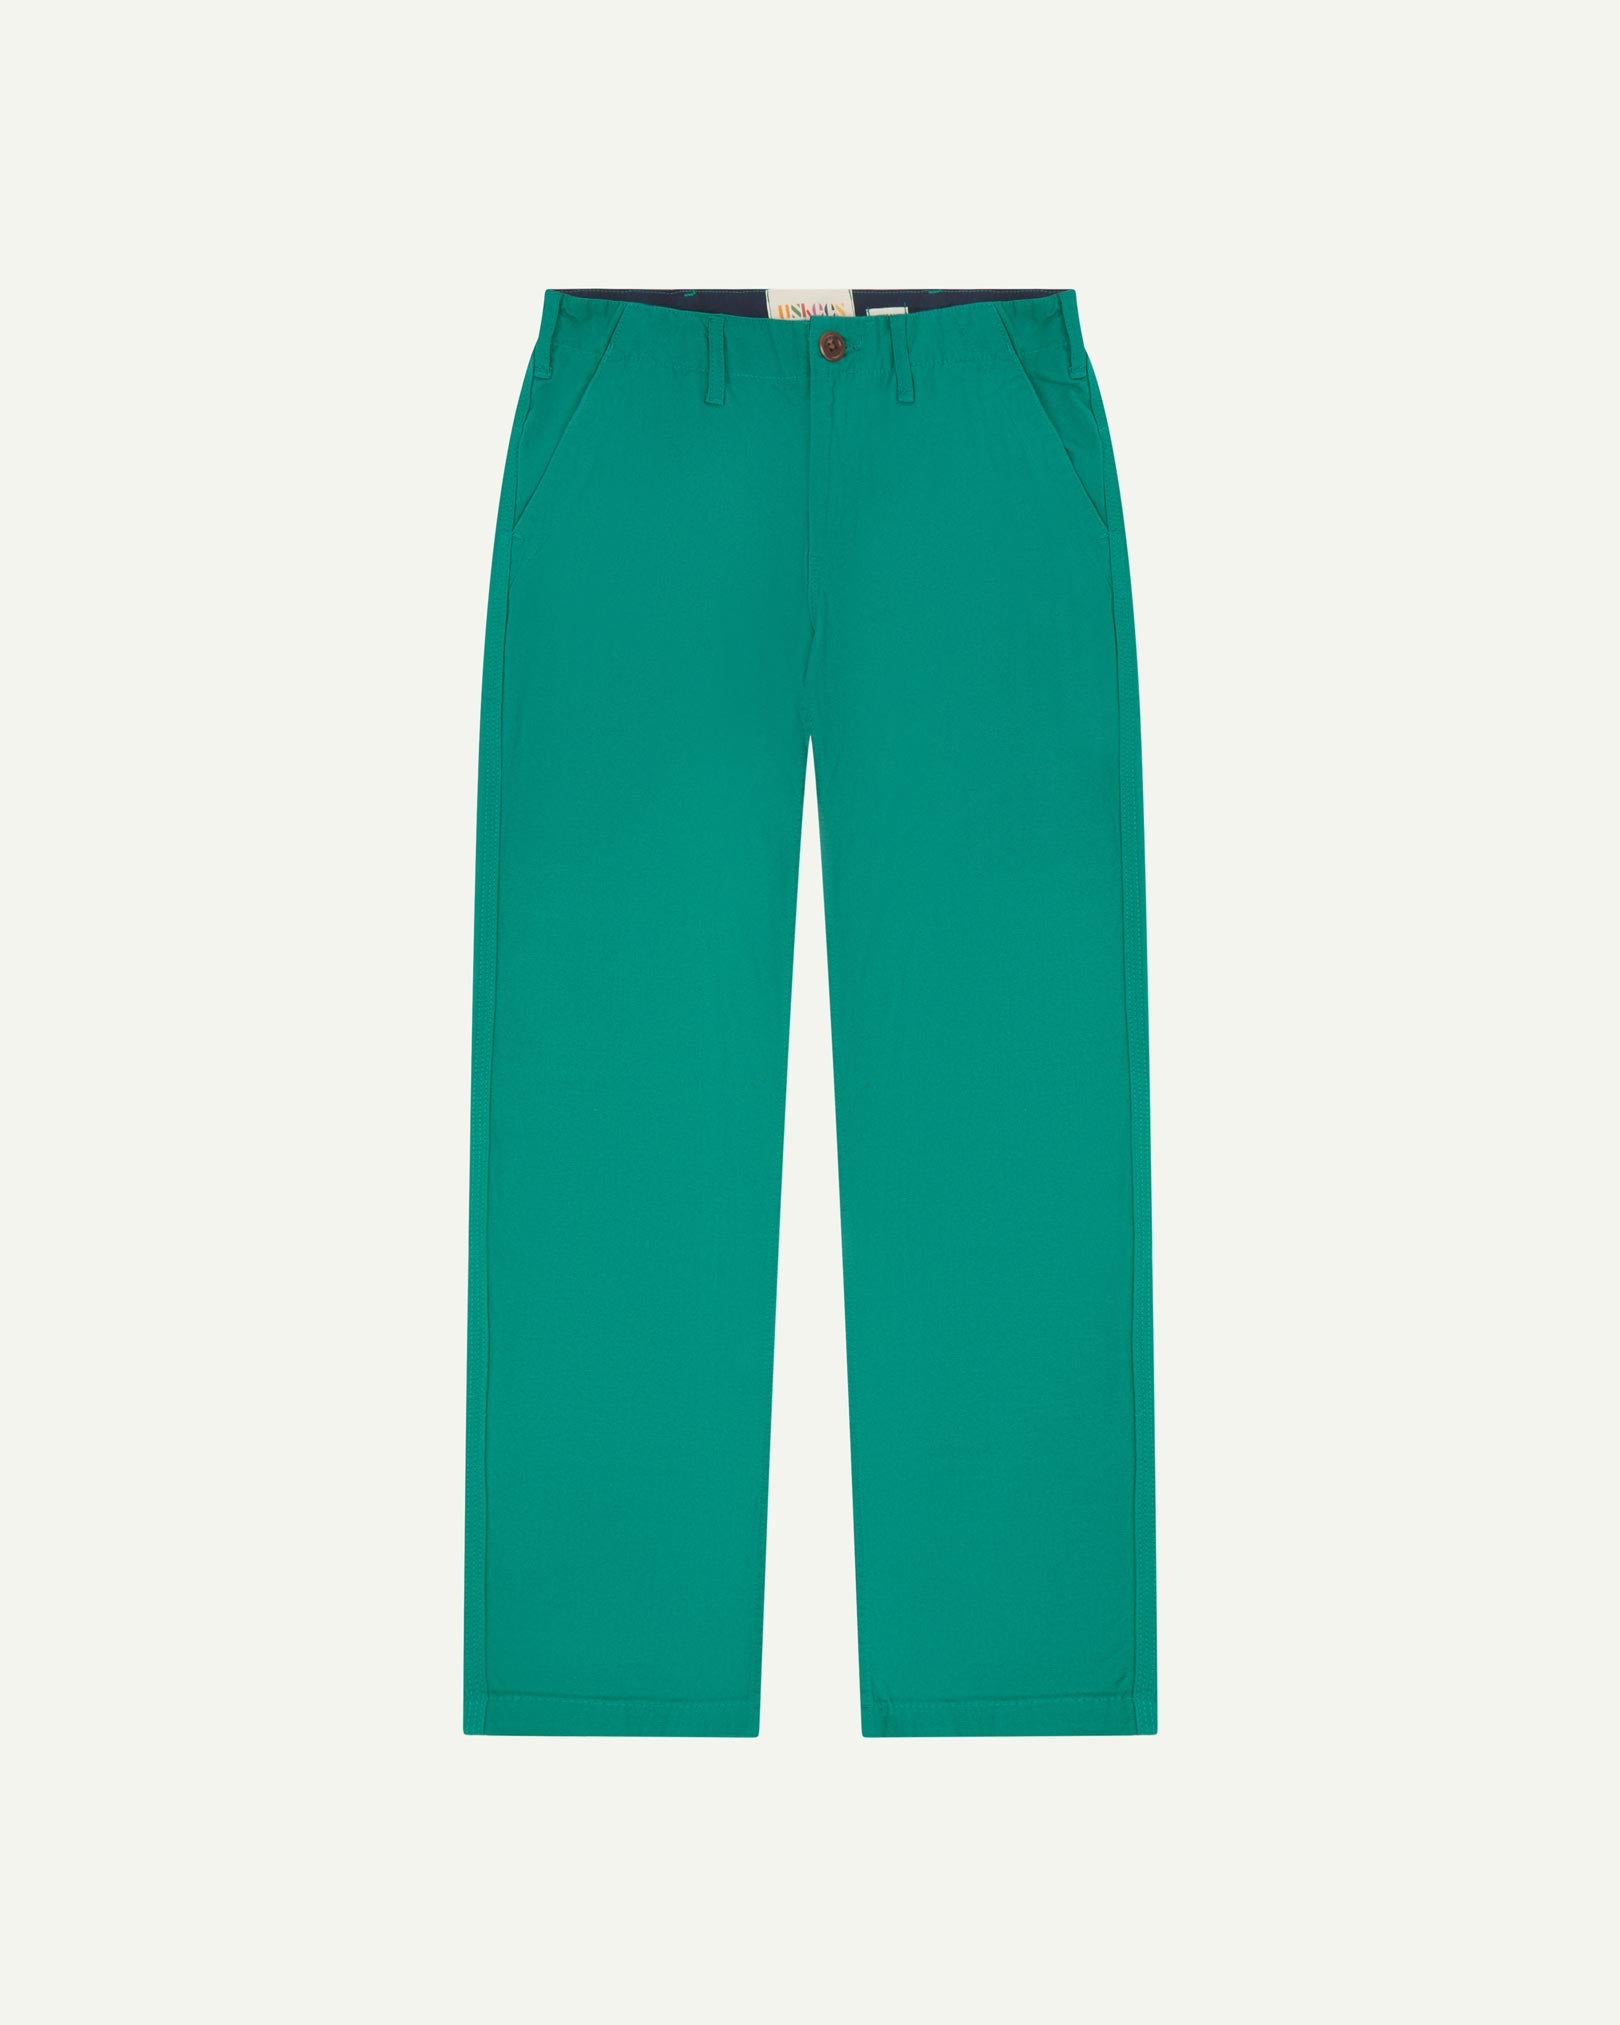 Front flat view of 5005 Uskees men's organic cotton foam green casual trousers with view of YKK zip fly and Corozo buttons.